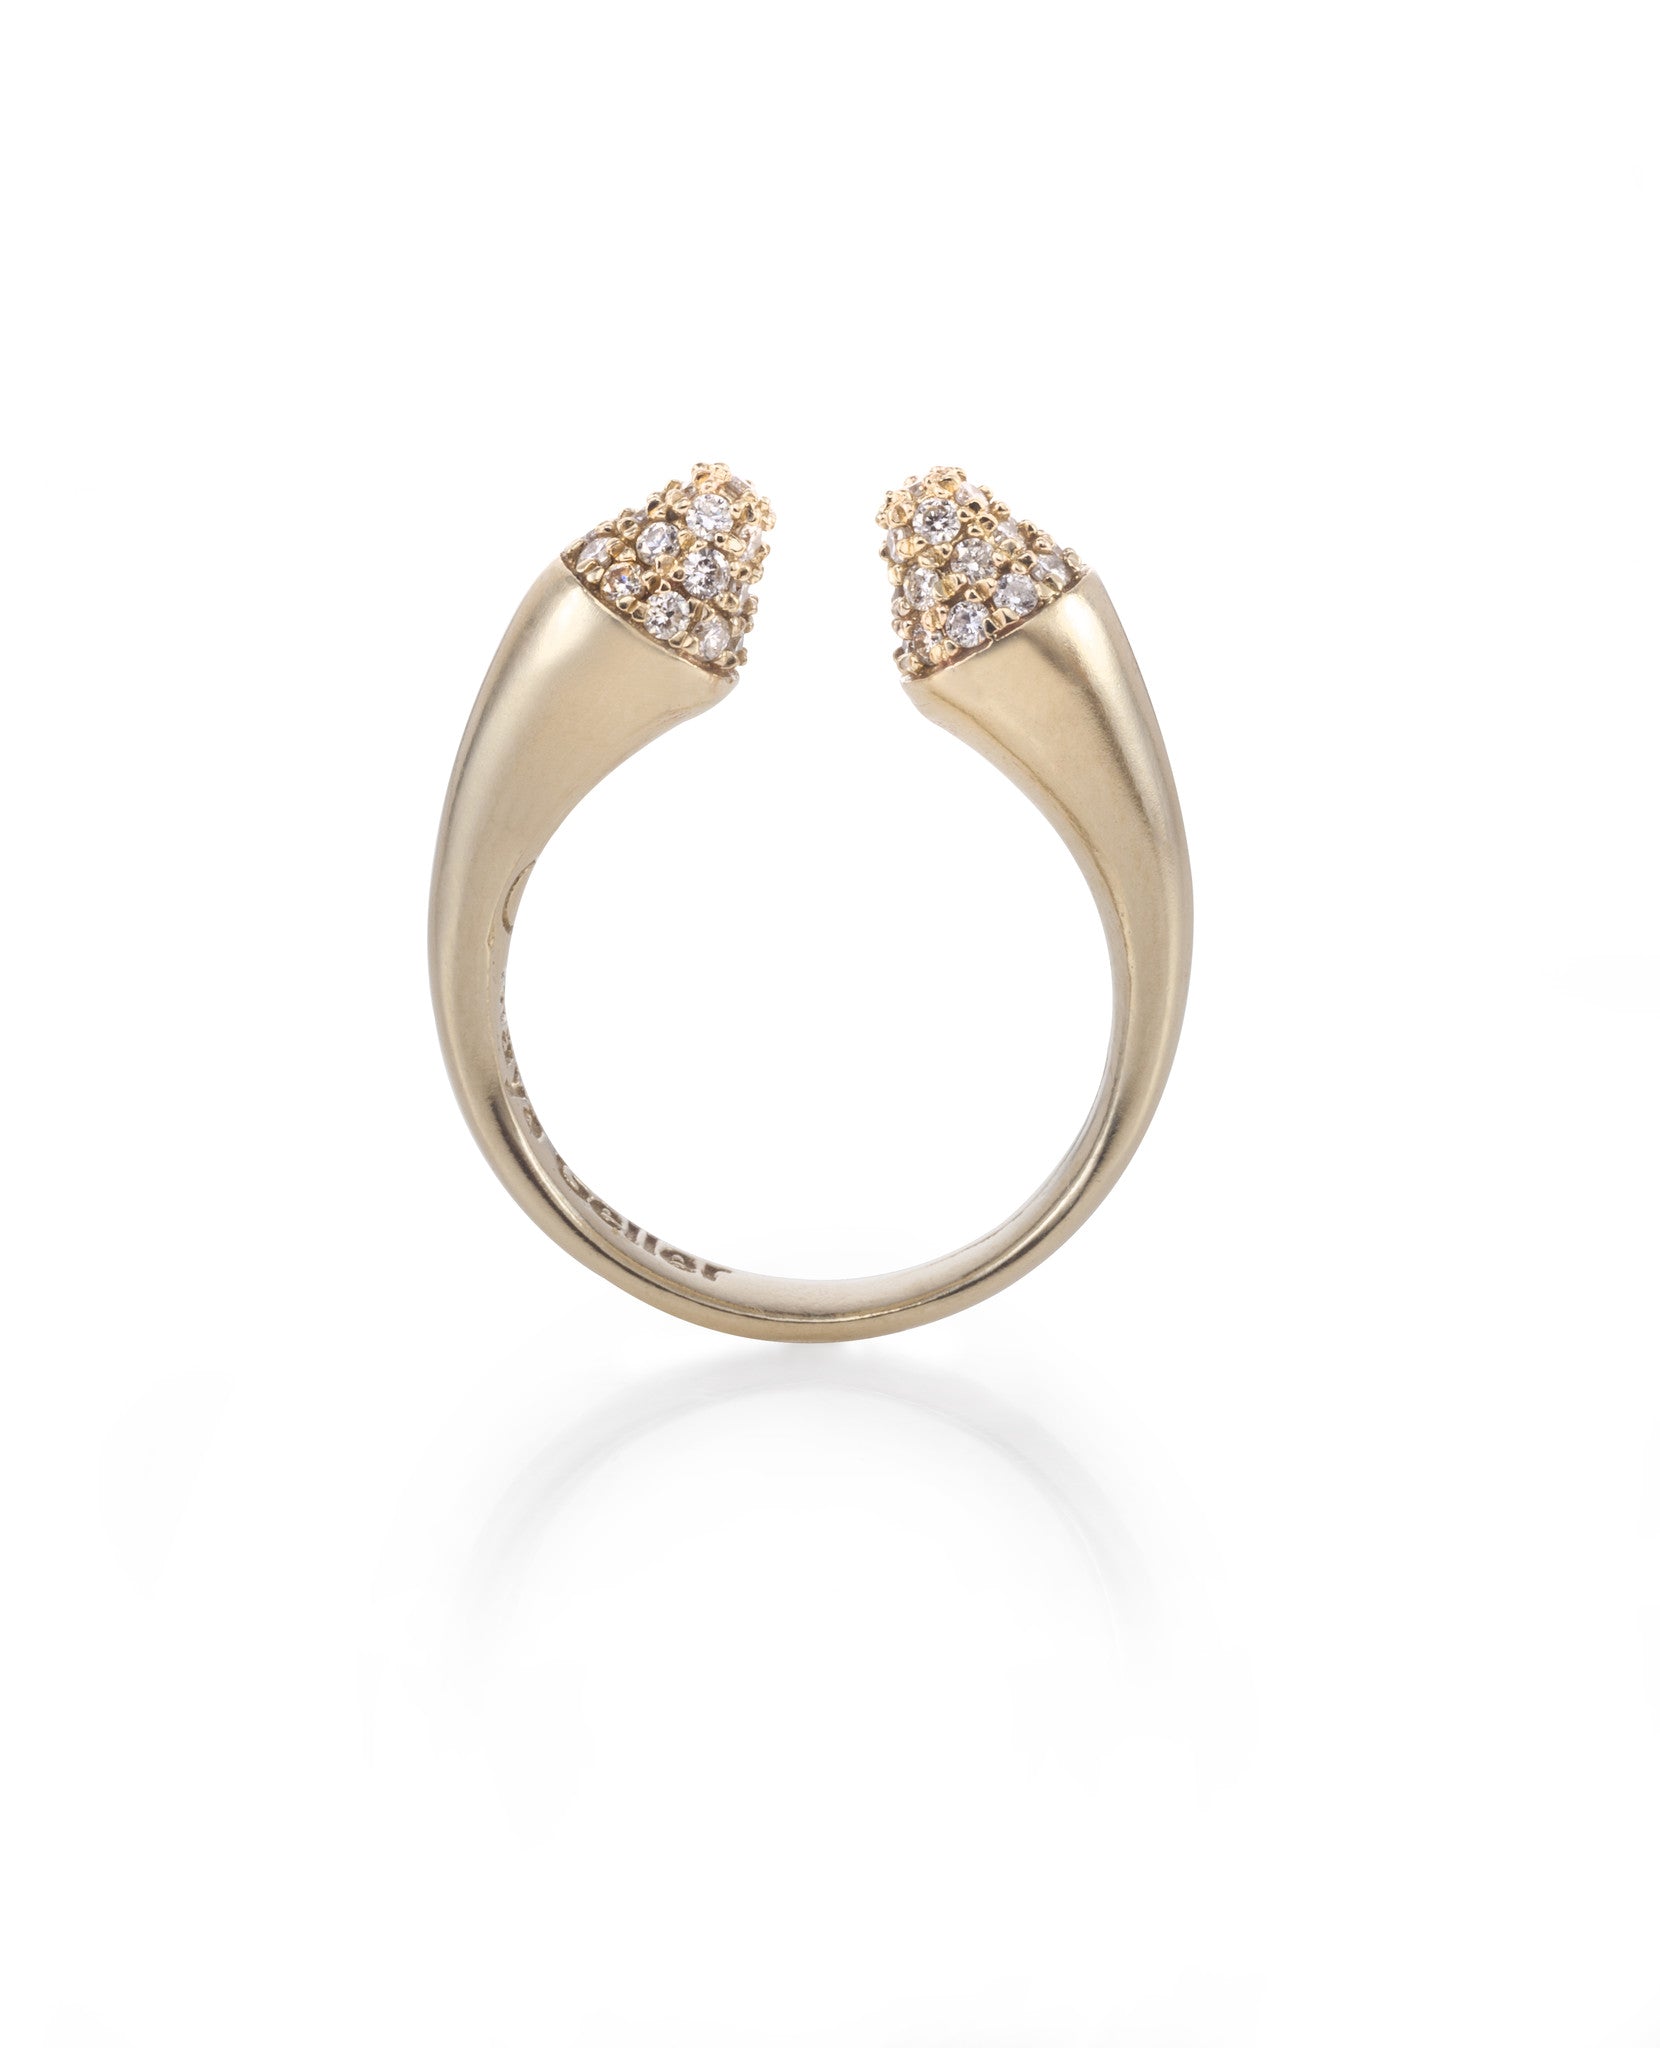 14K gold cone ring with white diamonds